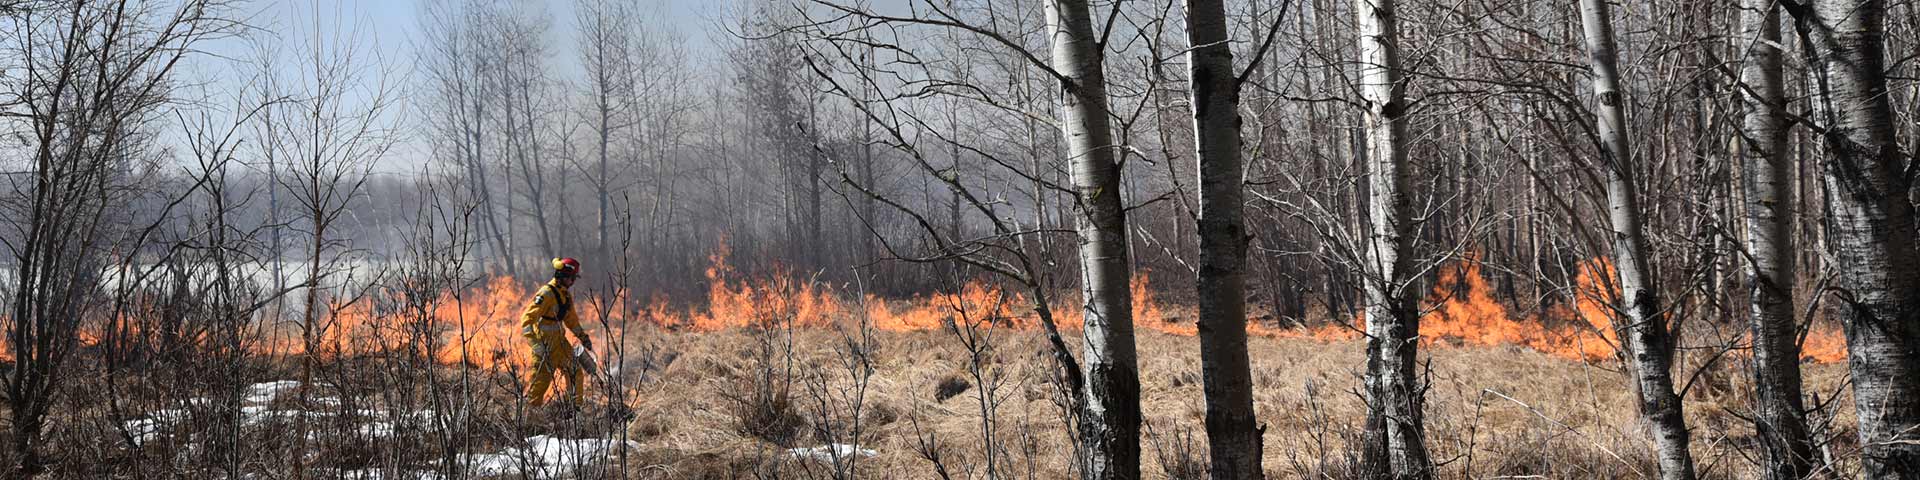 A fire management specialist ignites a prescribed fire